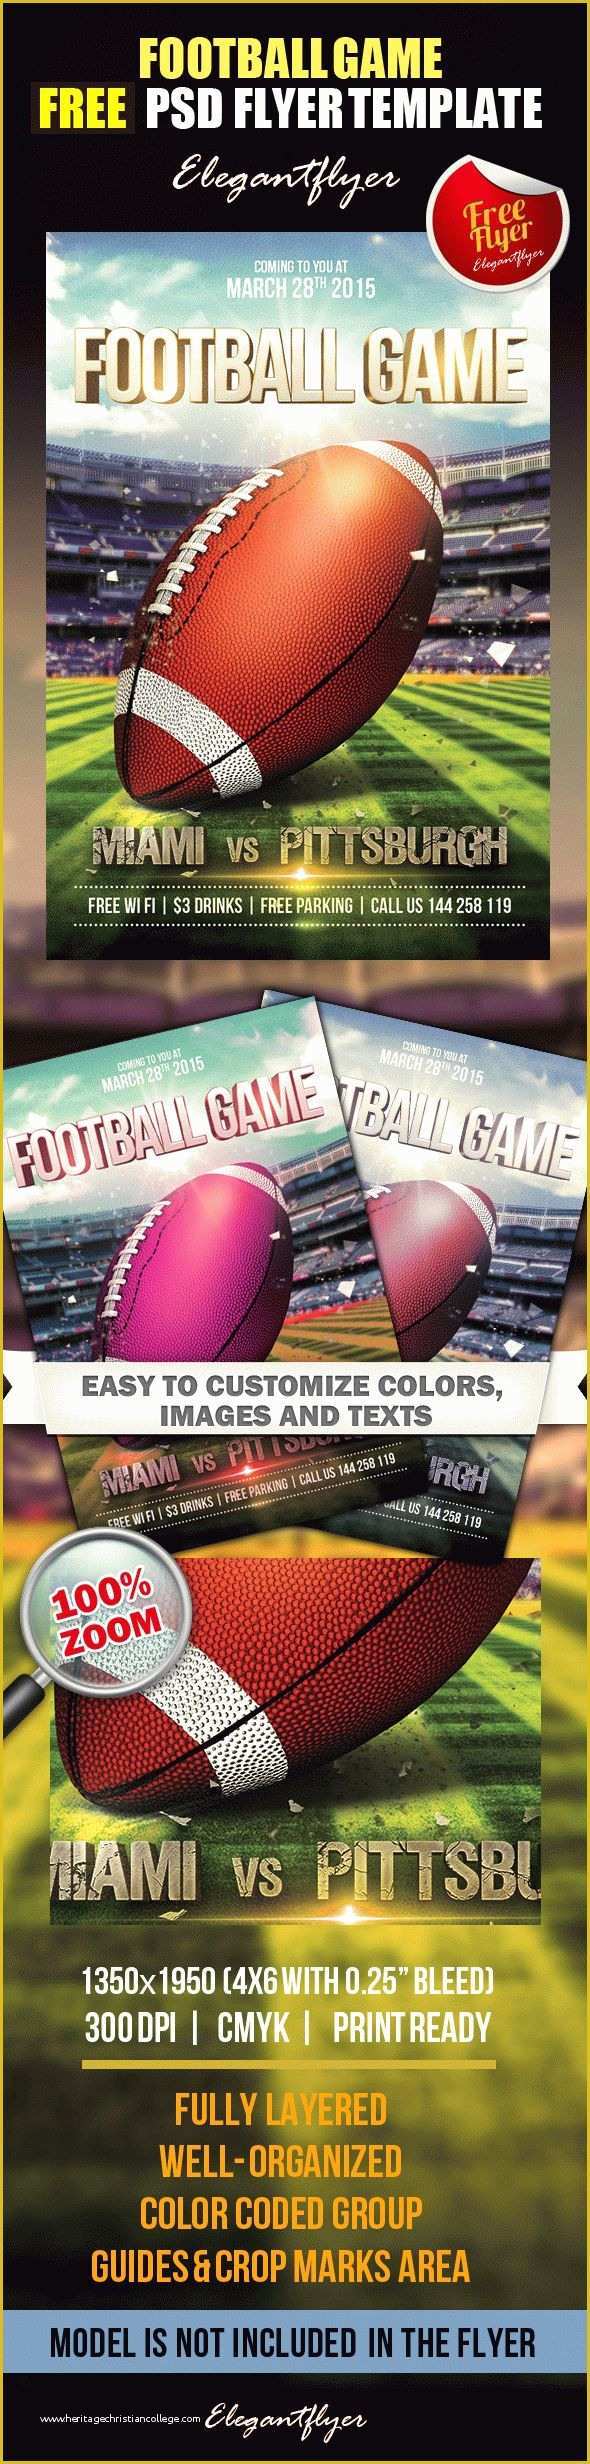 Football Flyer Template Free Of Football Game – Free Flyer Psd Template – by Elegantflyer